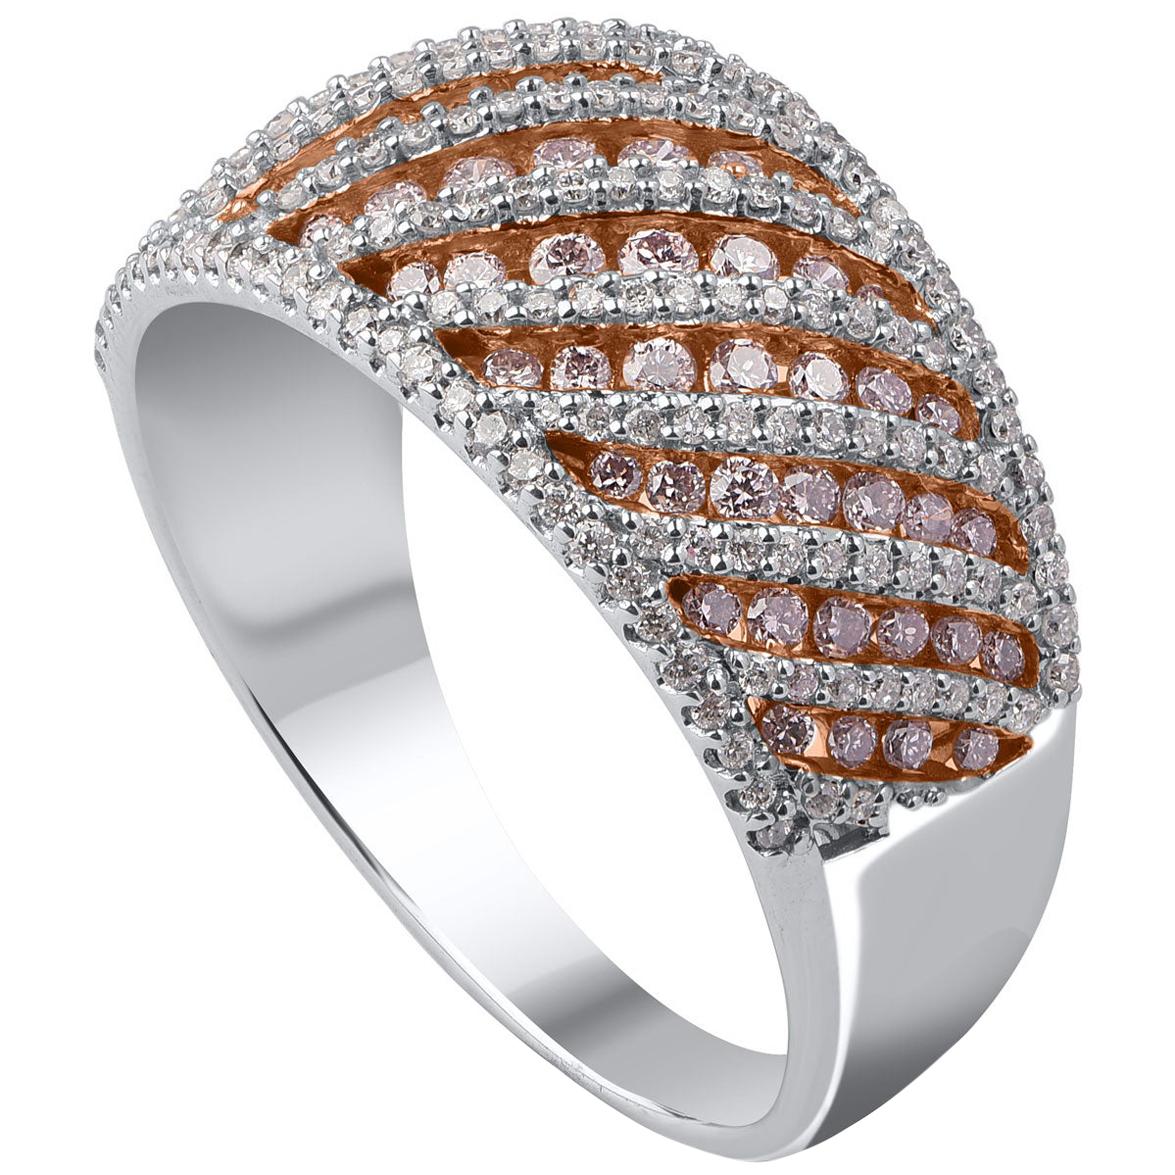 Made by our skillful craftsmen in 18 karat white gold and studded with 168 round-cut diamond and 69 natural pink rosé diamonds in prong and channel setting. Diamonds are graded H-I Color, I1 Clarity. 

Ring size is US size 7 and can be resized on